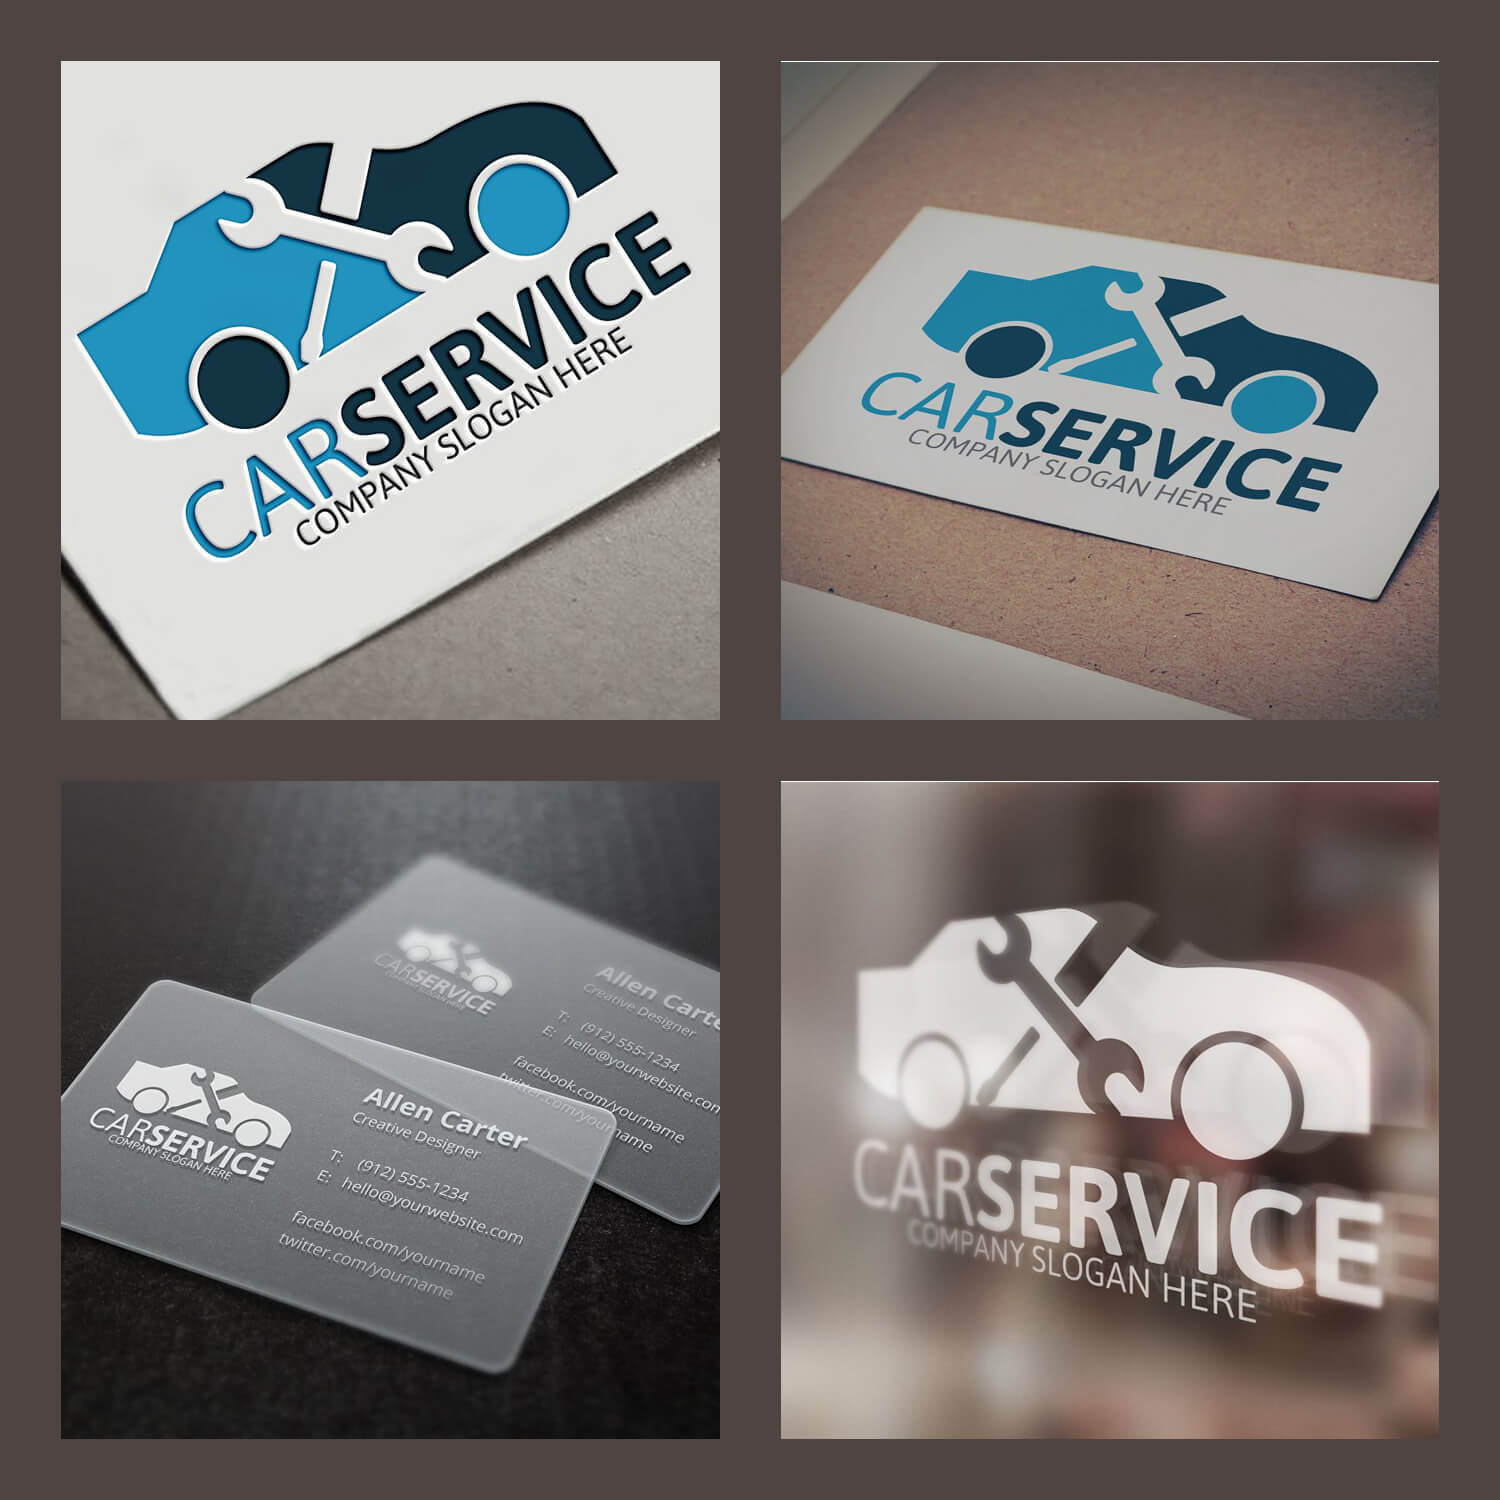 Four square images in one with blue and white car service logos on a brown background.